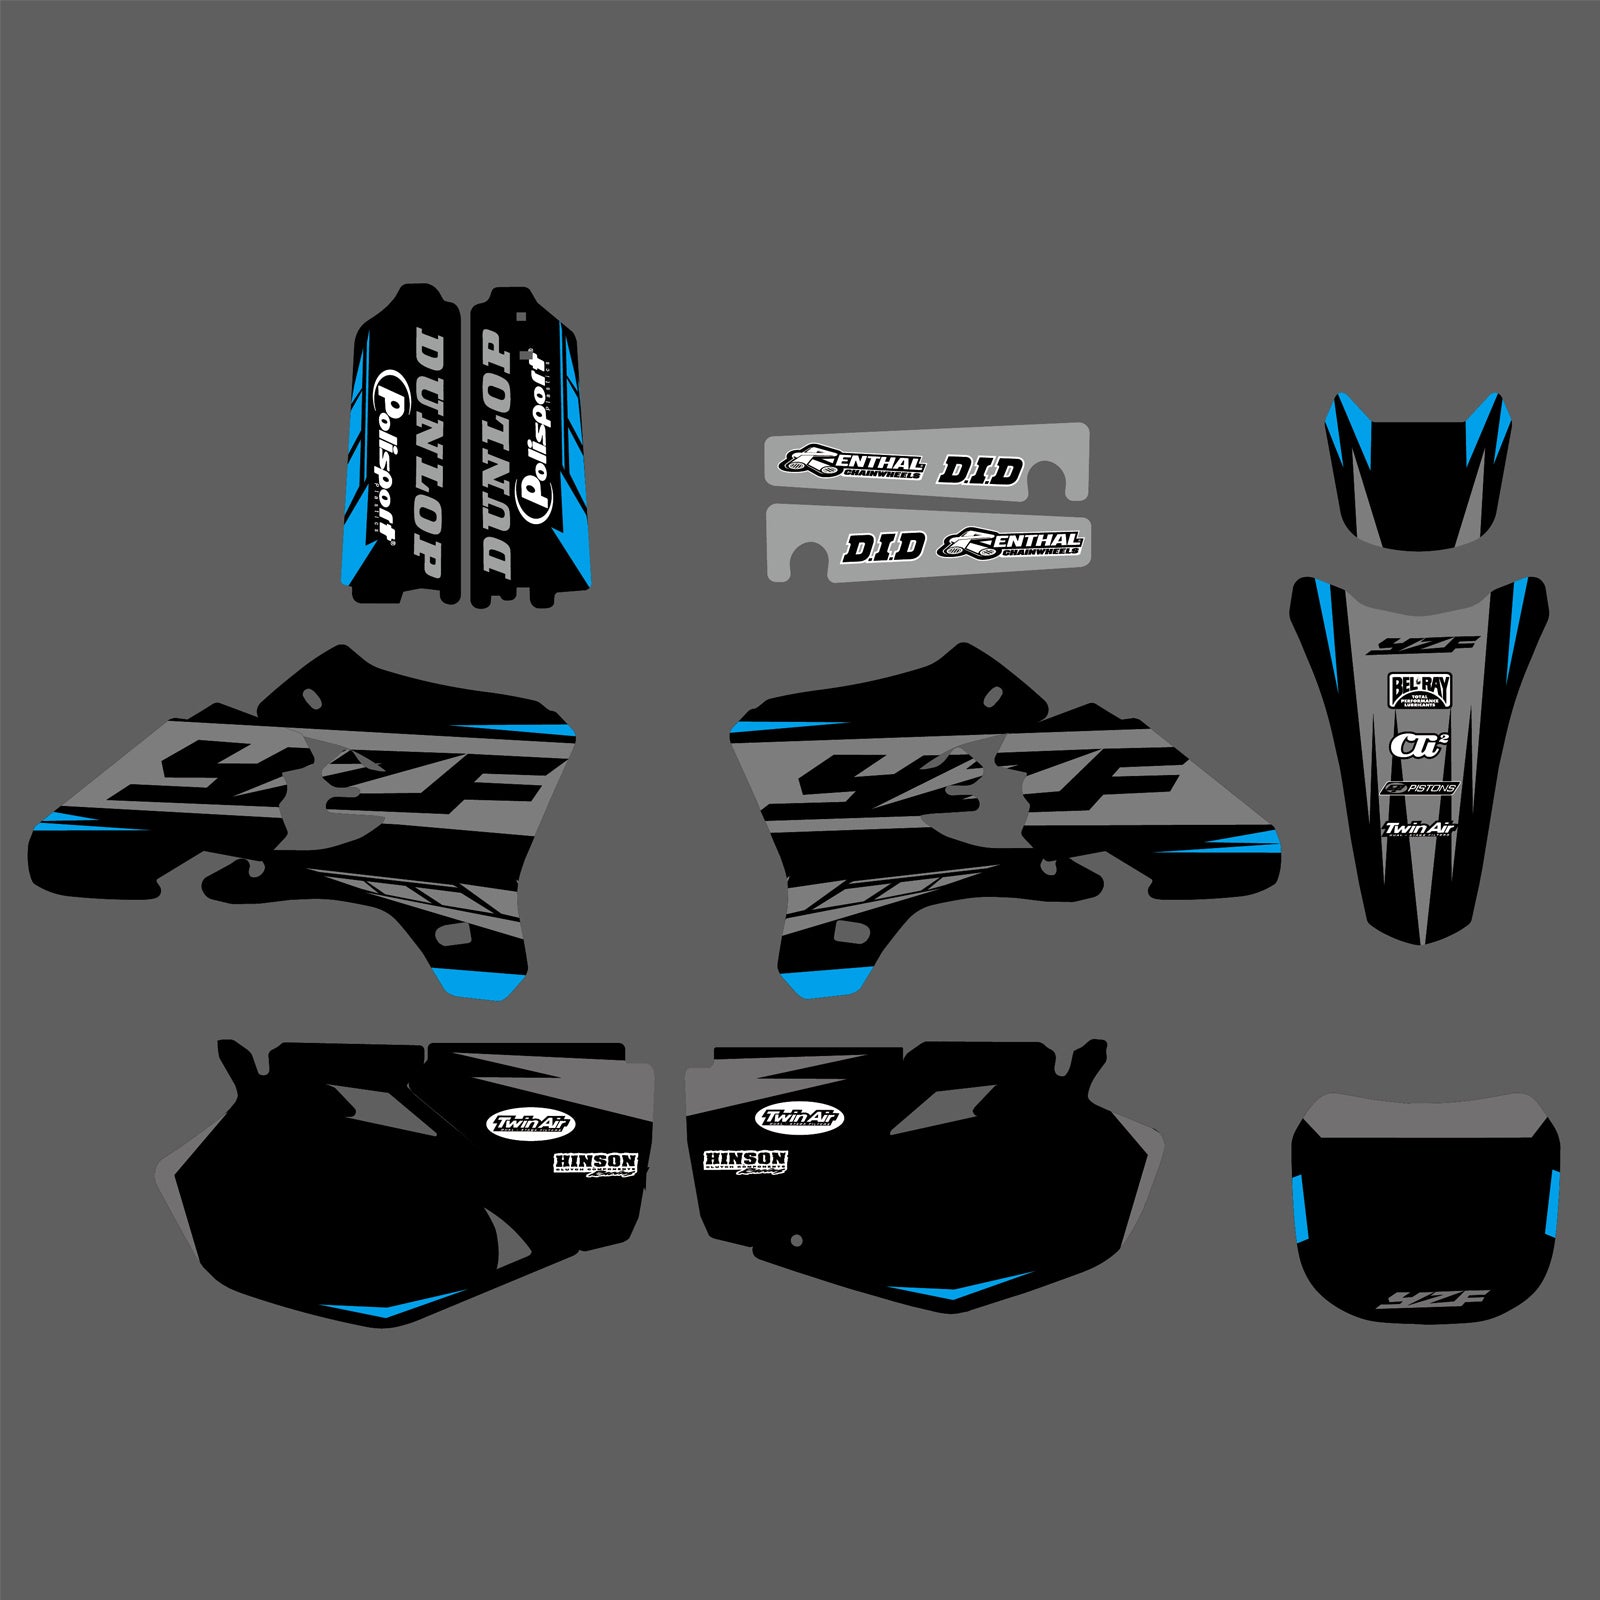 Team Decals Stickers Graphics Kit For YAMAHA YZ250F YZ450F 2003-2005